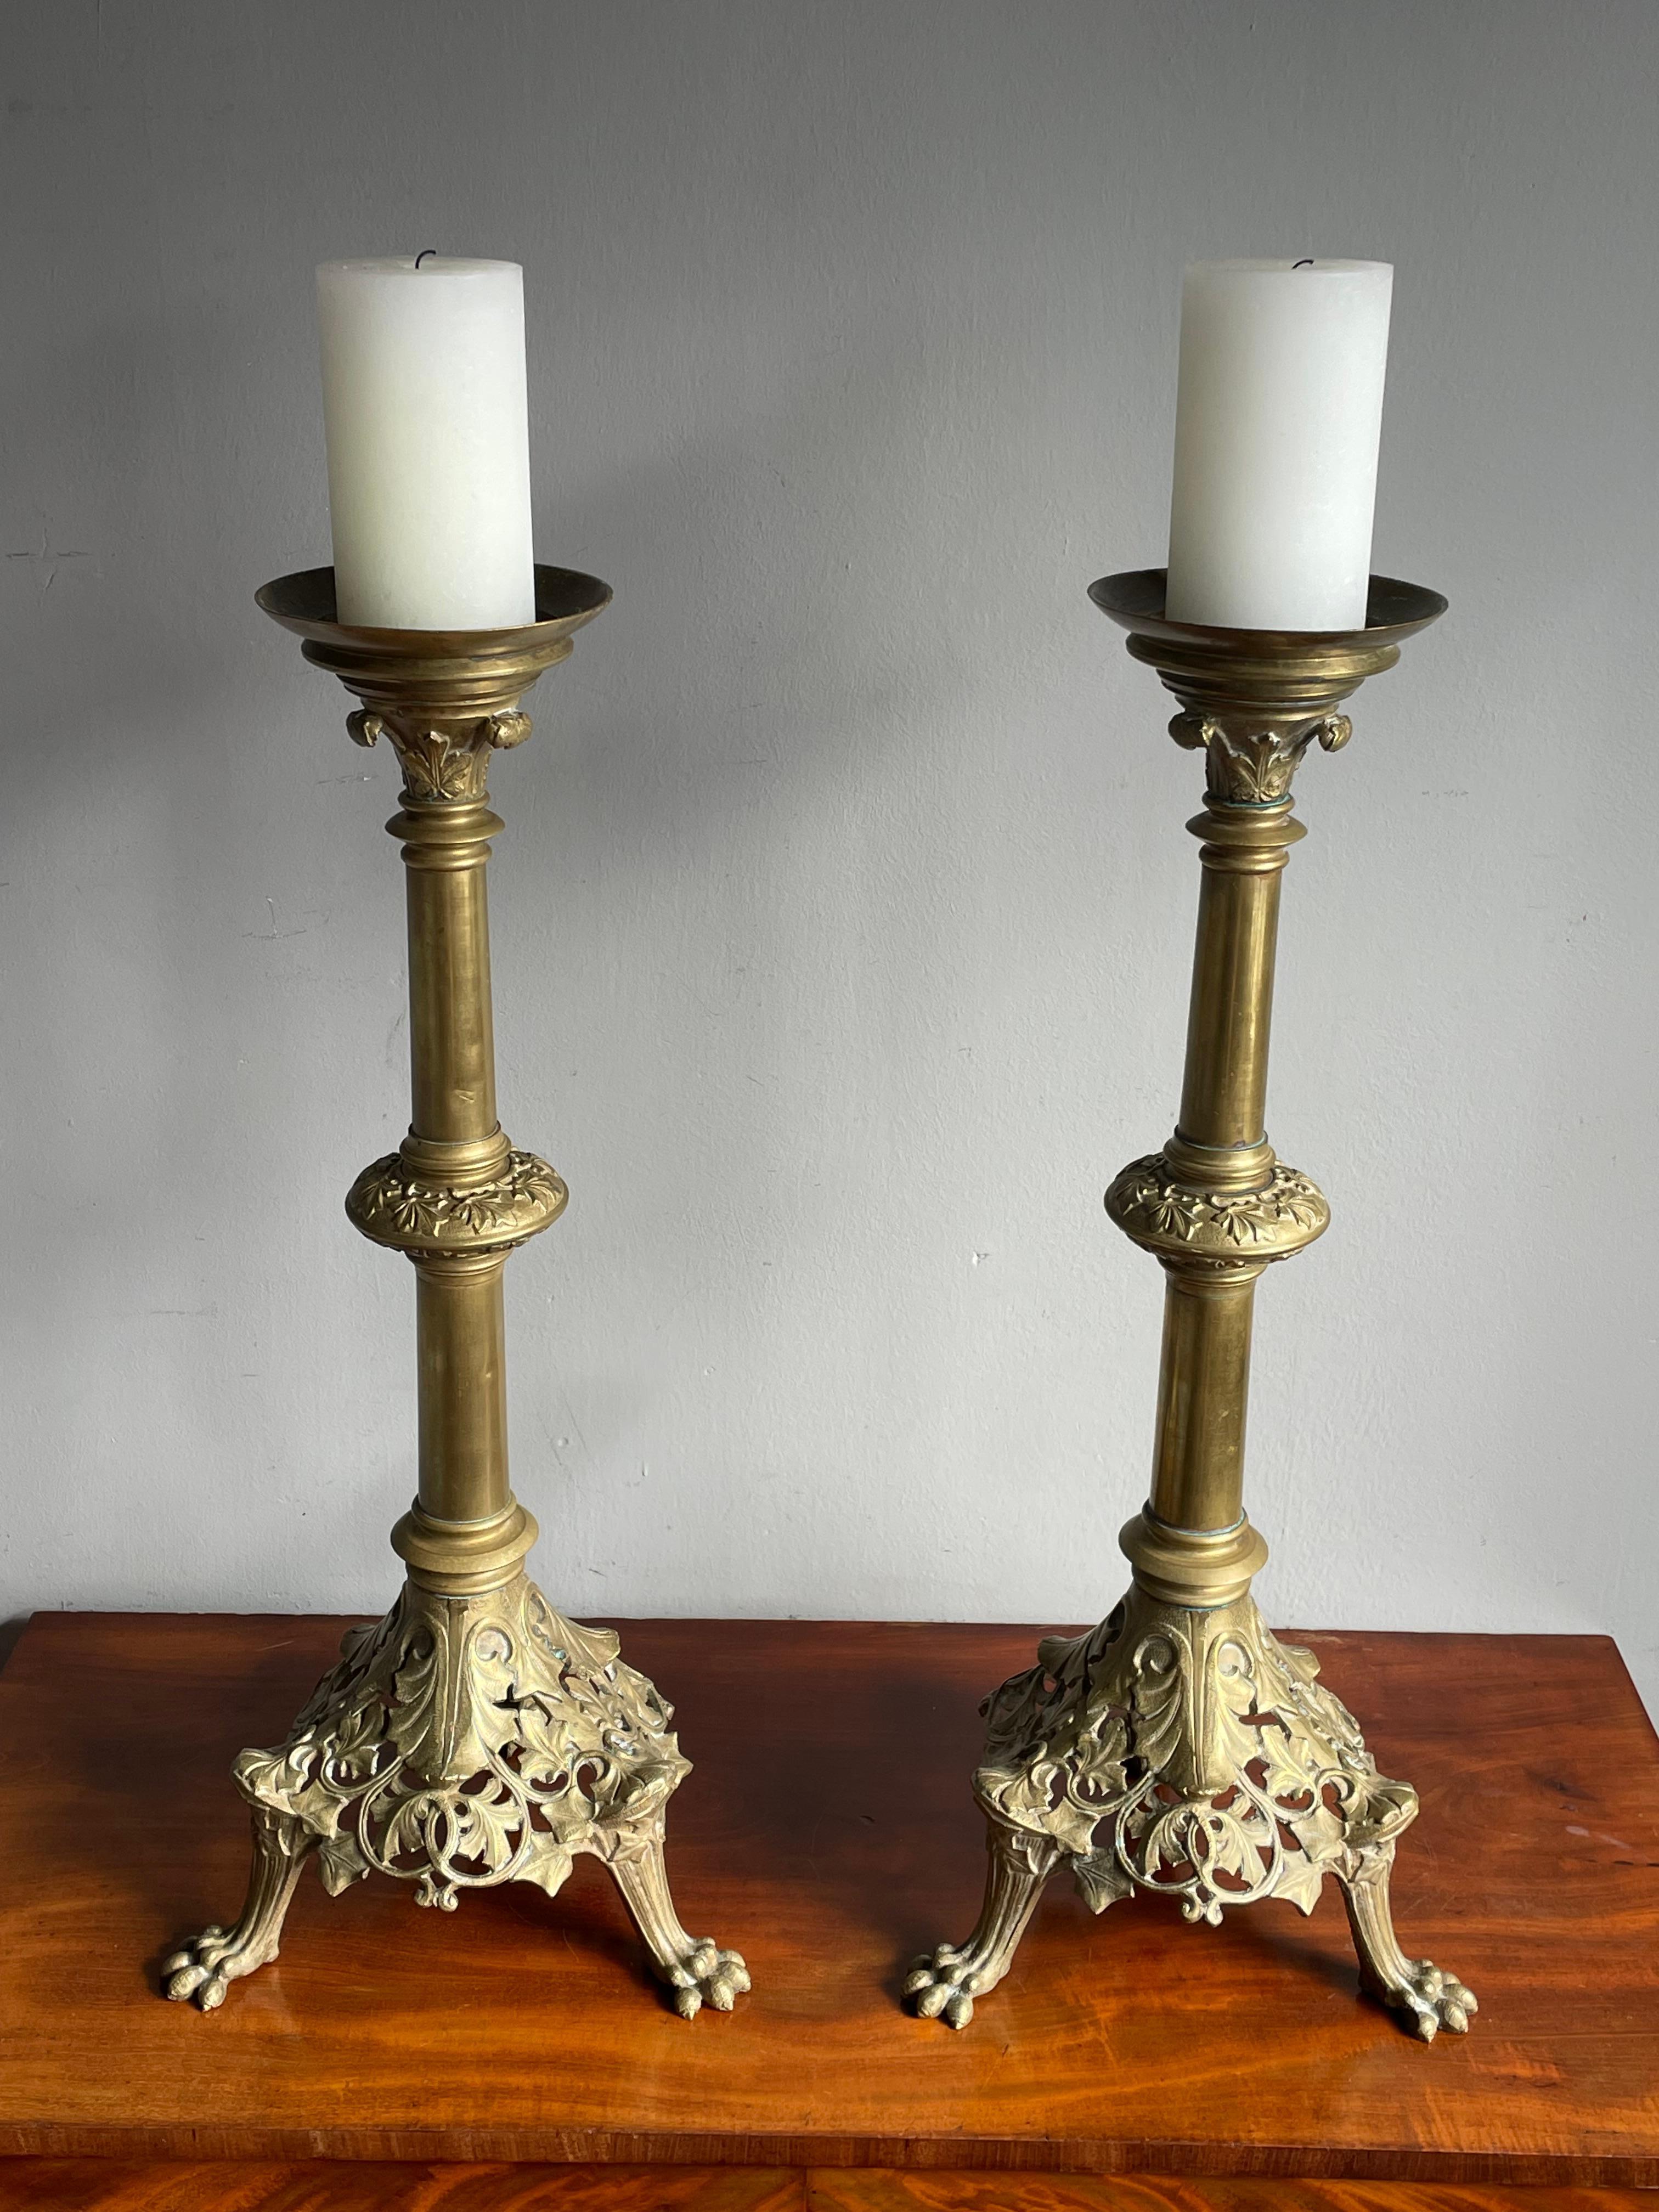 Stunning pair of antique Gothic Style candleholders.

If you are looking for a stylish and good size pair of church candle holders to create that special atmosphere then this bronze pair could be perfect for you. These handmade and finer quality